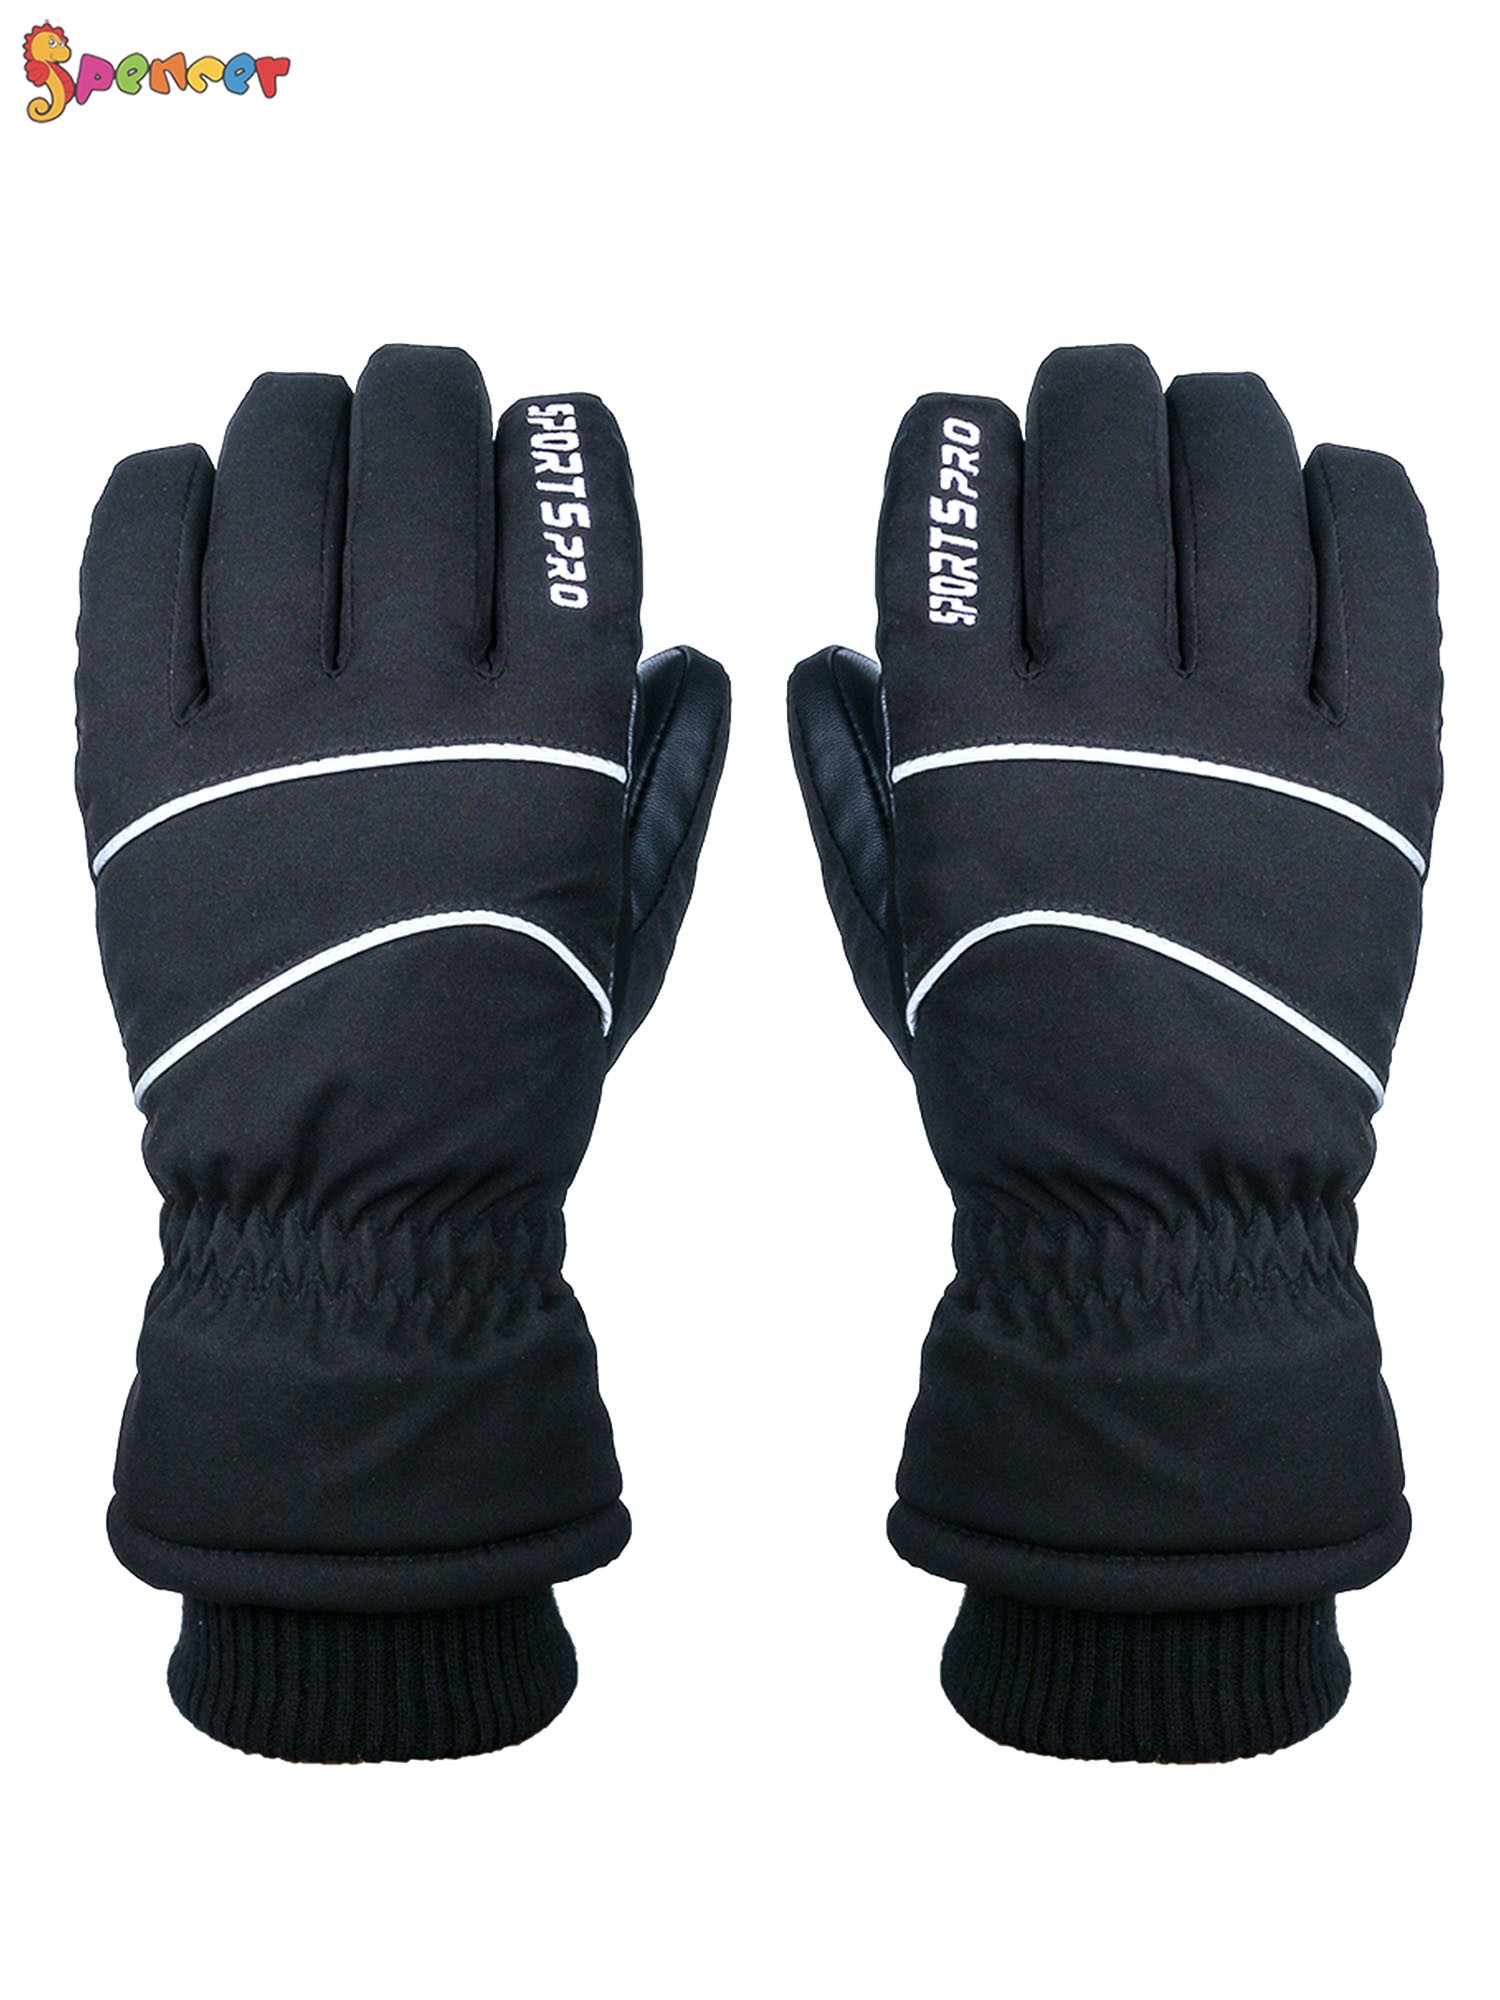 Spencer Ski & Snow Gloves for Men Women, Waterproof Winter Touchscreen Snowboard Gloves for Cold Weather Skiing and Snowboarding - image 5 of 8